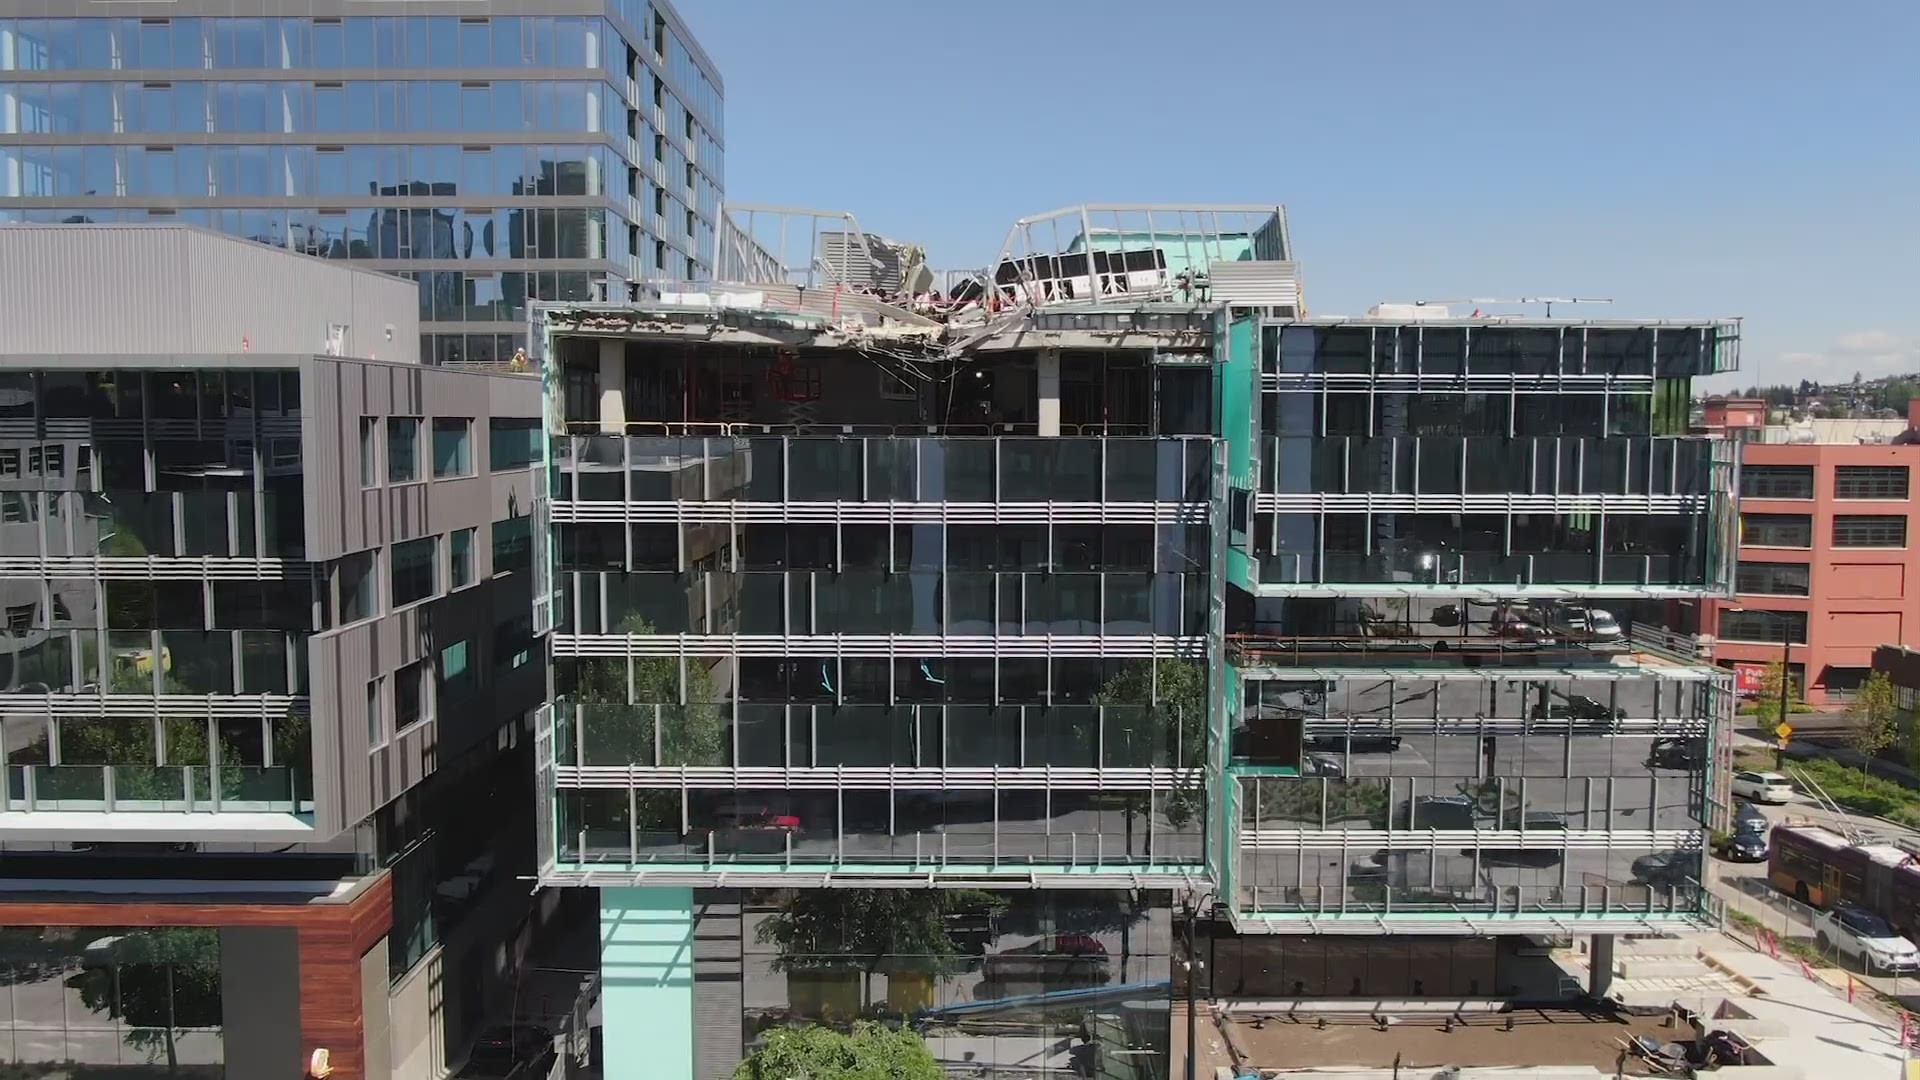 Drone video shows the damage left by a crane that collapsed - killing four people, and damaging a building under construction in downtown Seattle.